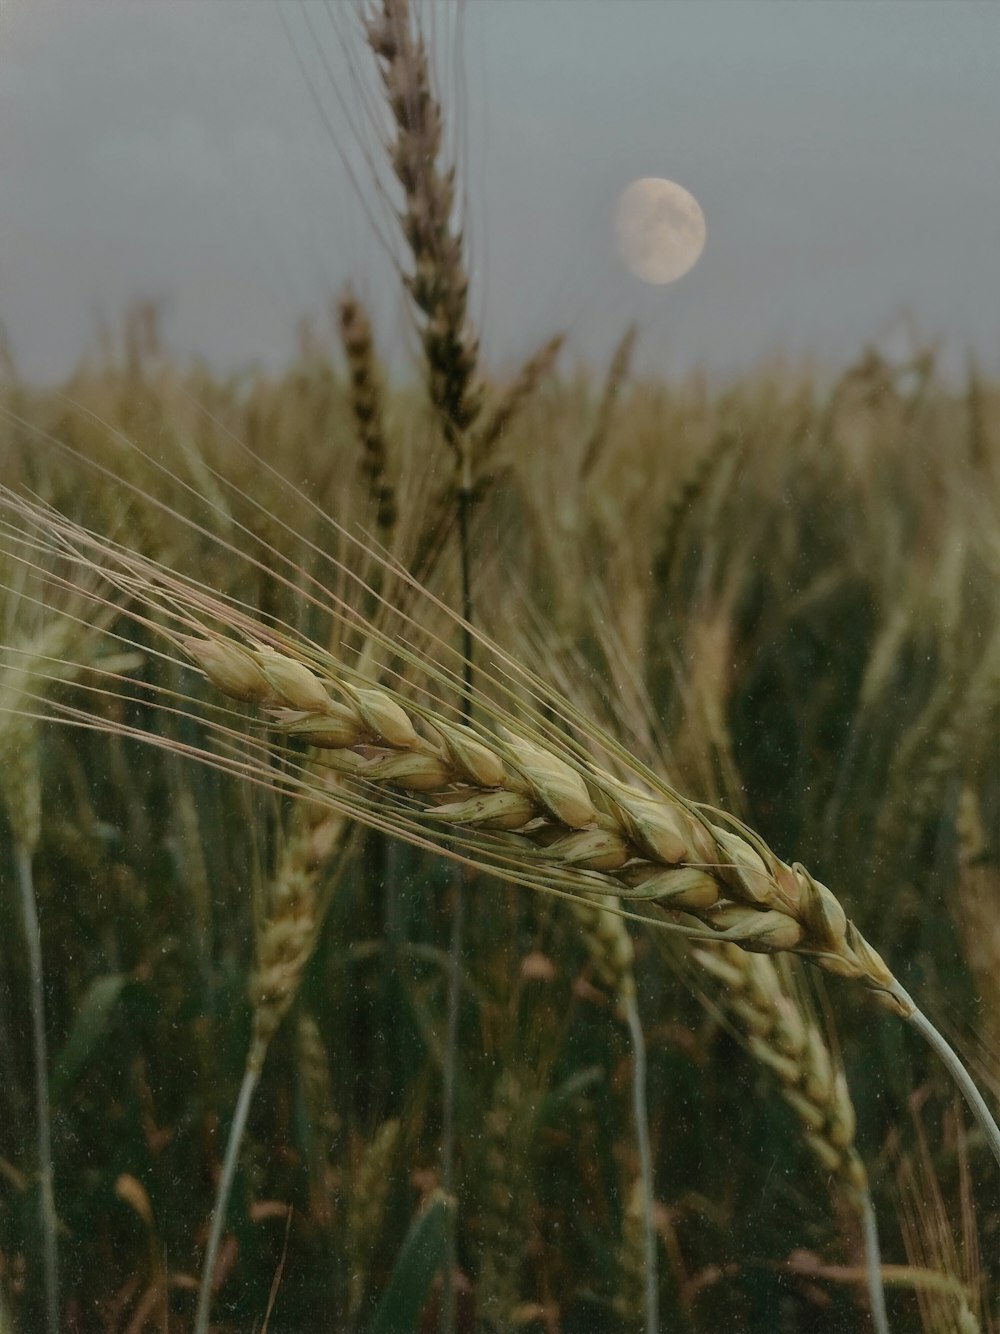 a close up of a wheat field with a full moon in the background